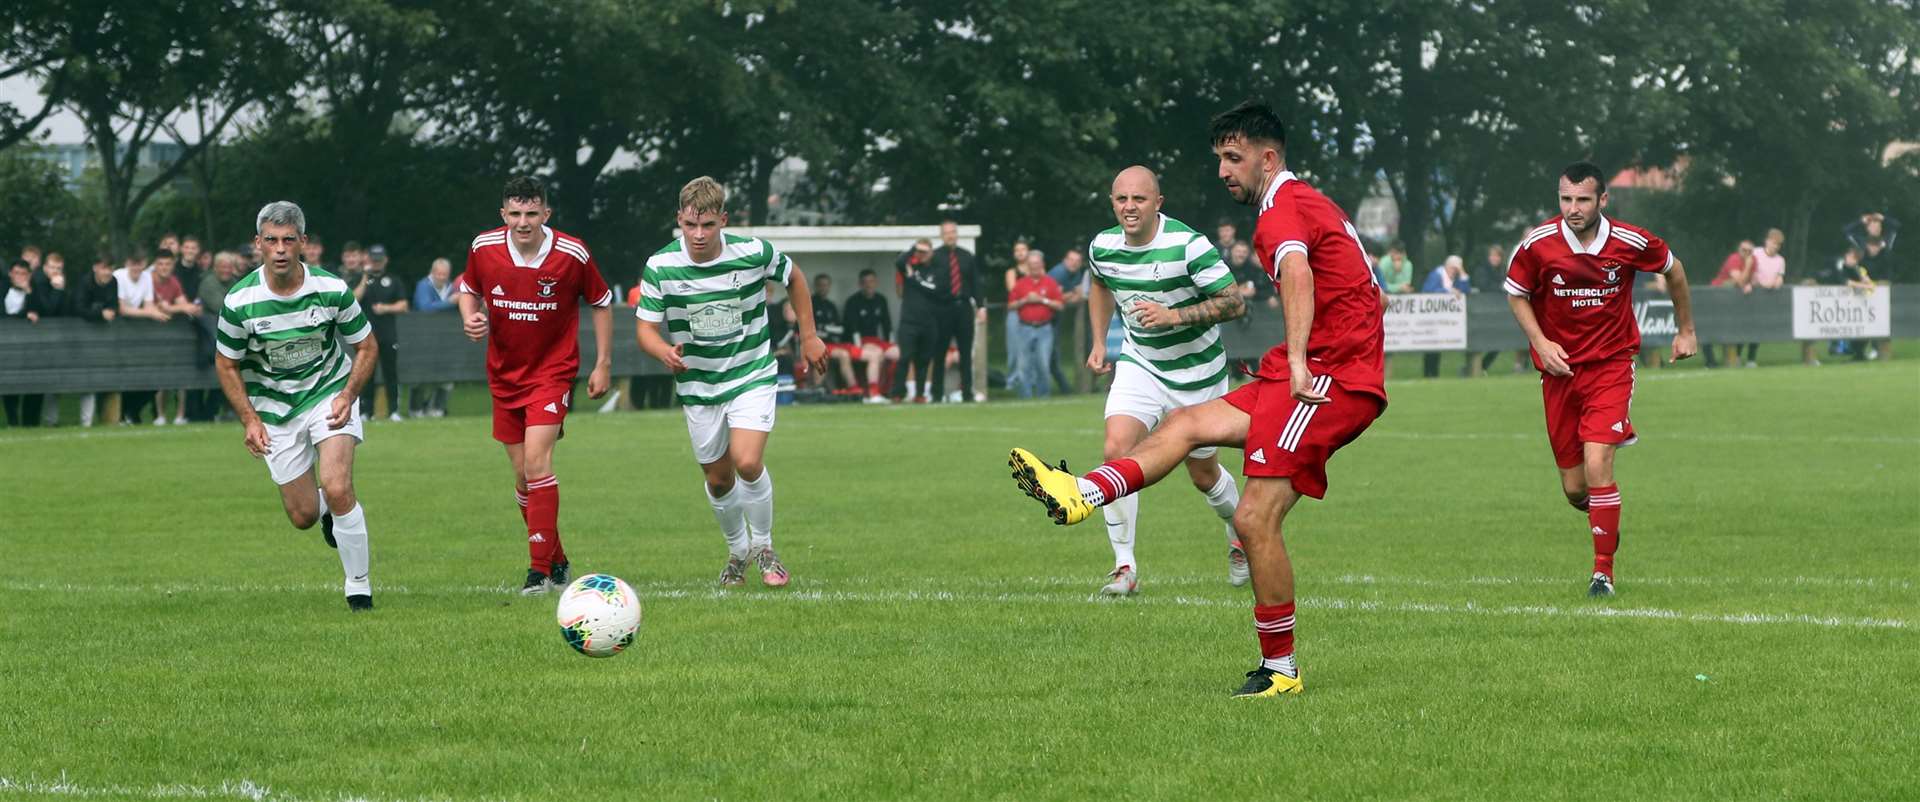 Graham MacNab opens the scoring for Wick Groats from the penalty spot. Picture: James Gunn